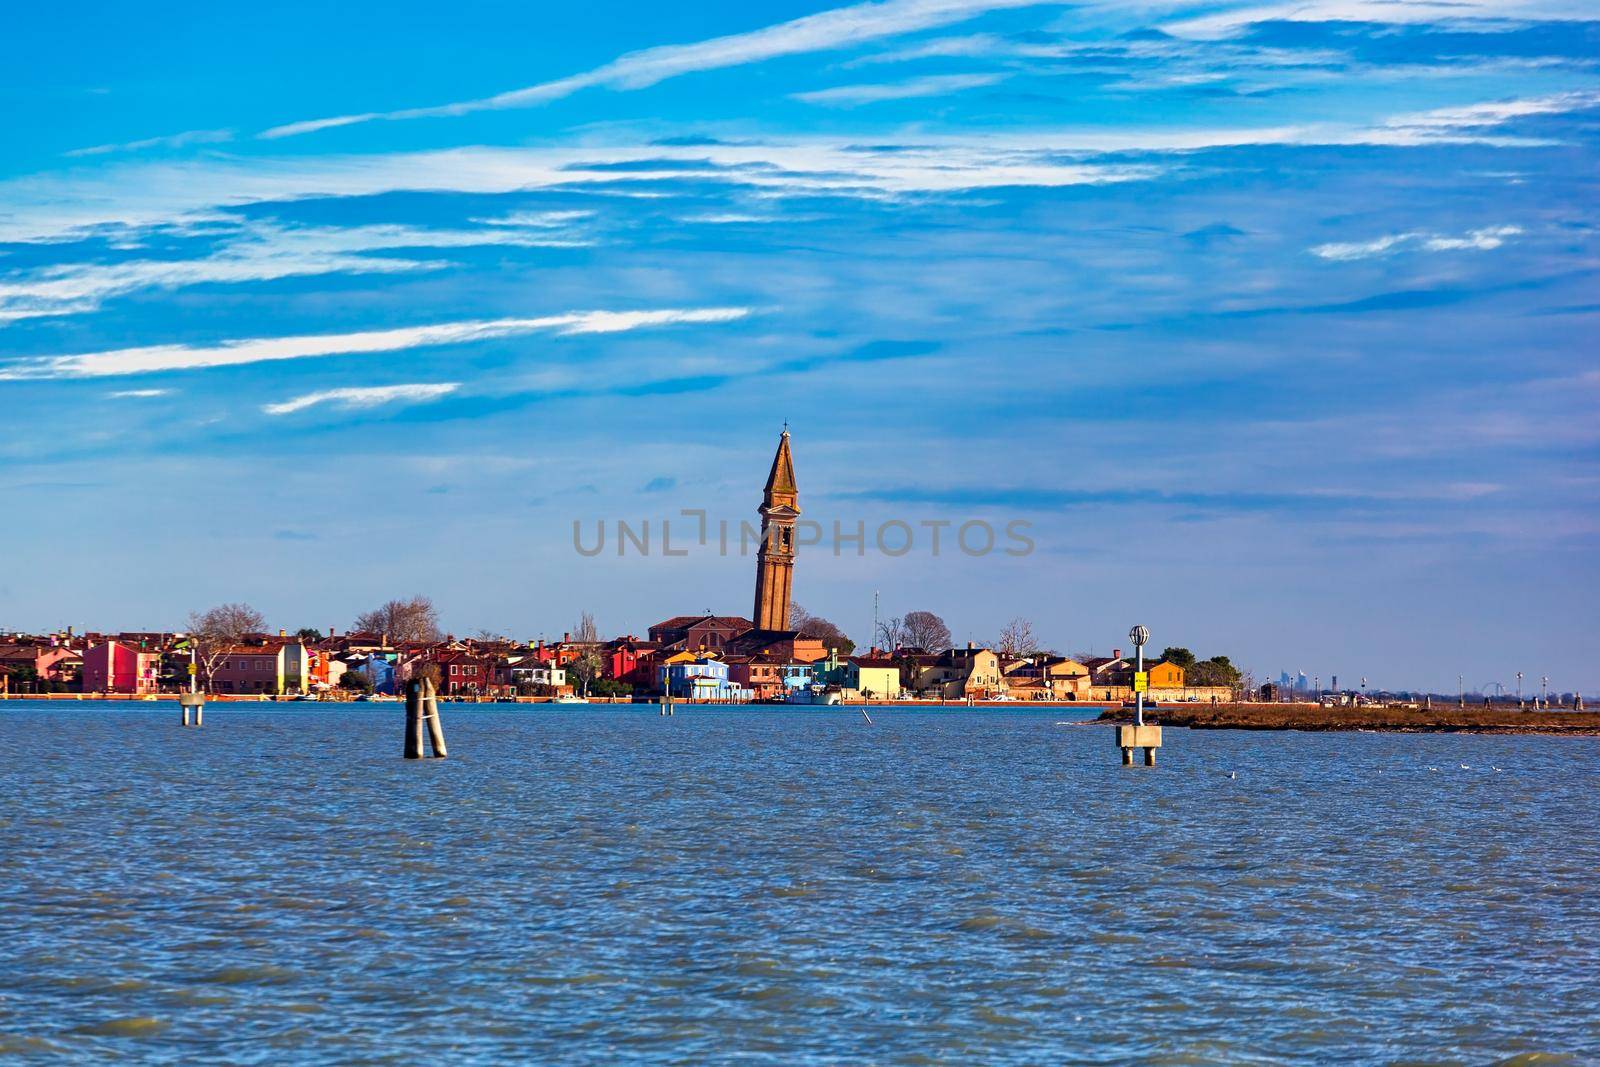 Leaning Bell Tower of the Church of San Martino in Burano Island - Venice Italy by bepsimage